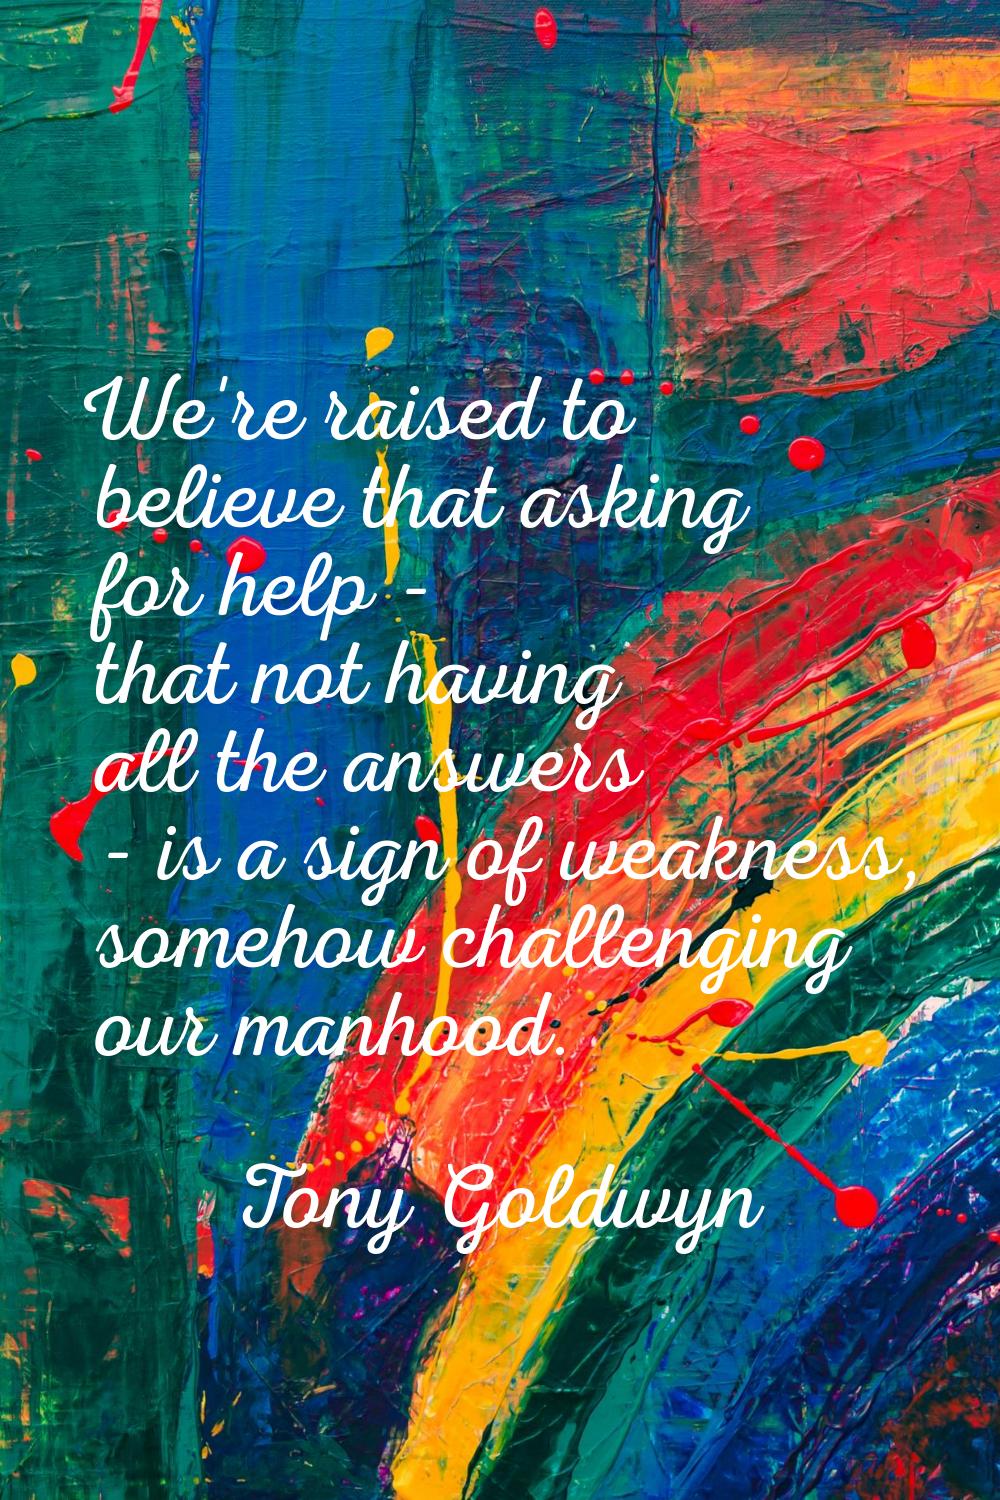 We're raised to believe that asking for help - that not having all the answers - is a sign of weakn